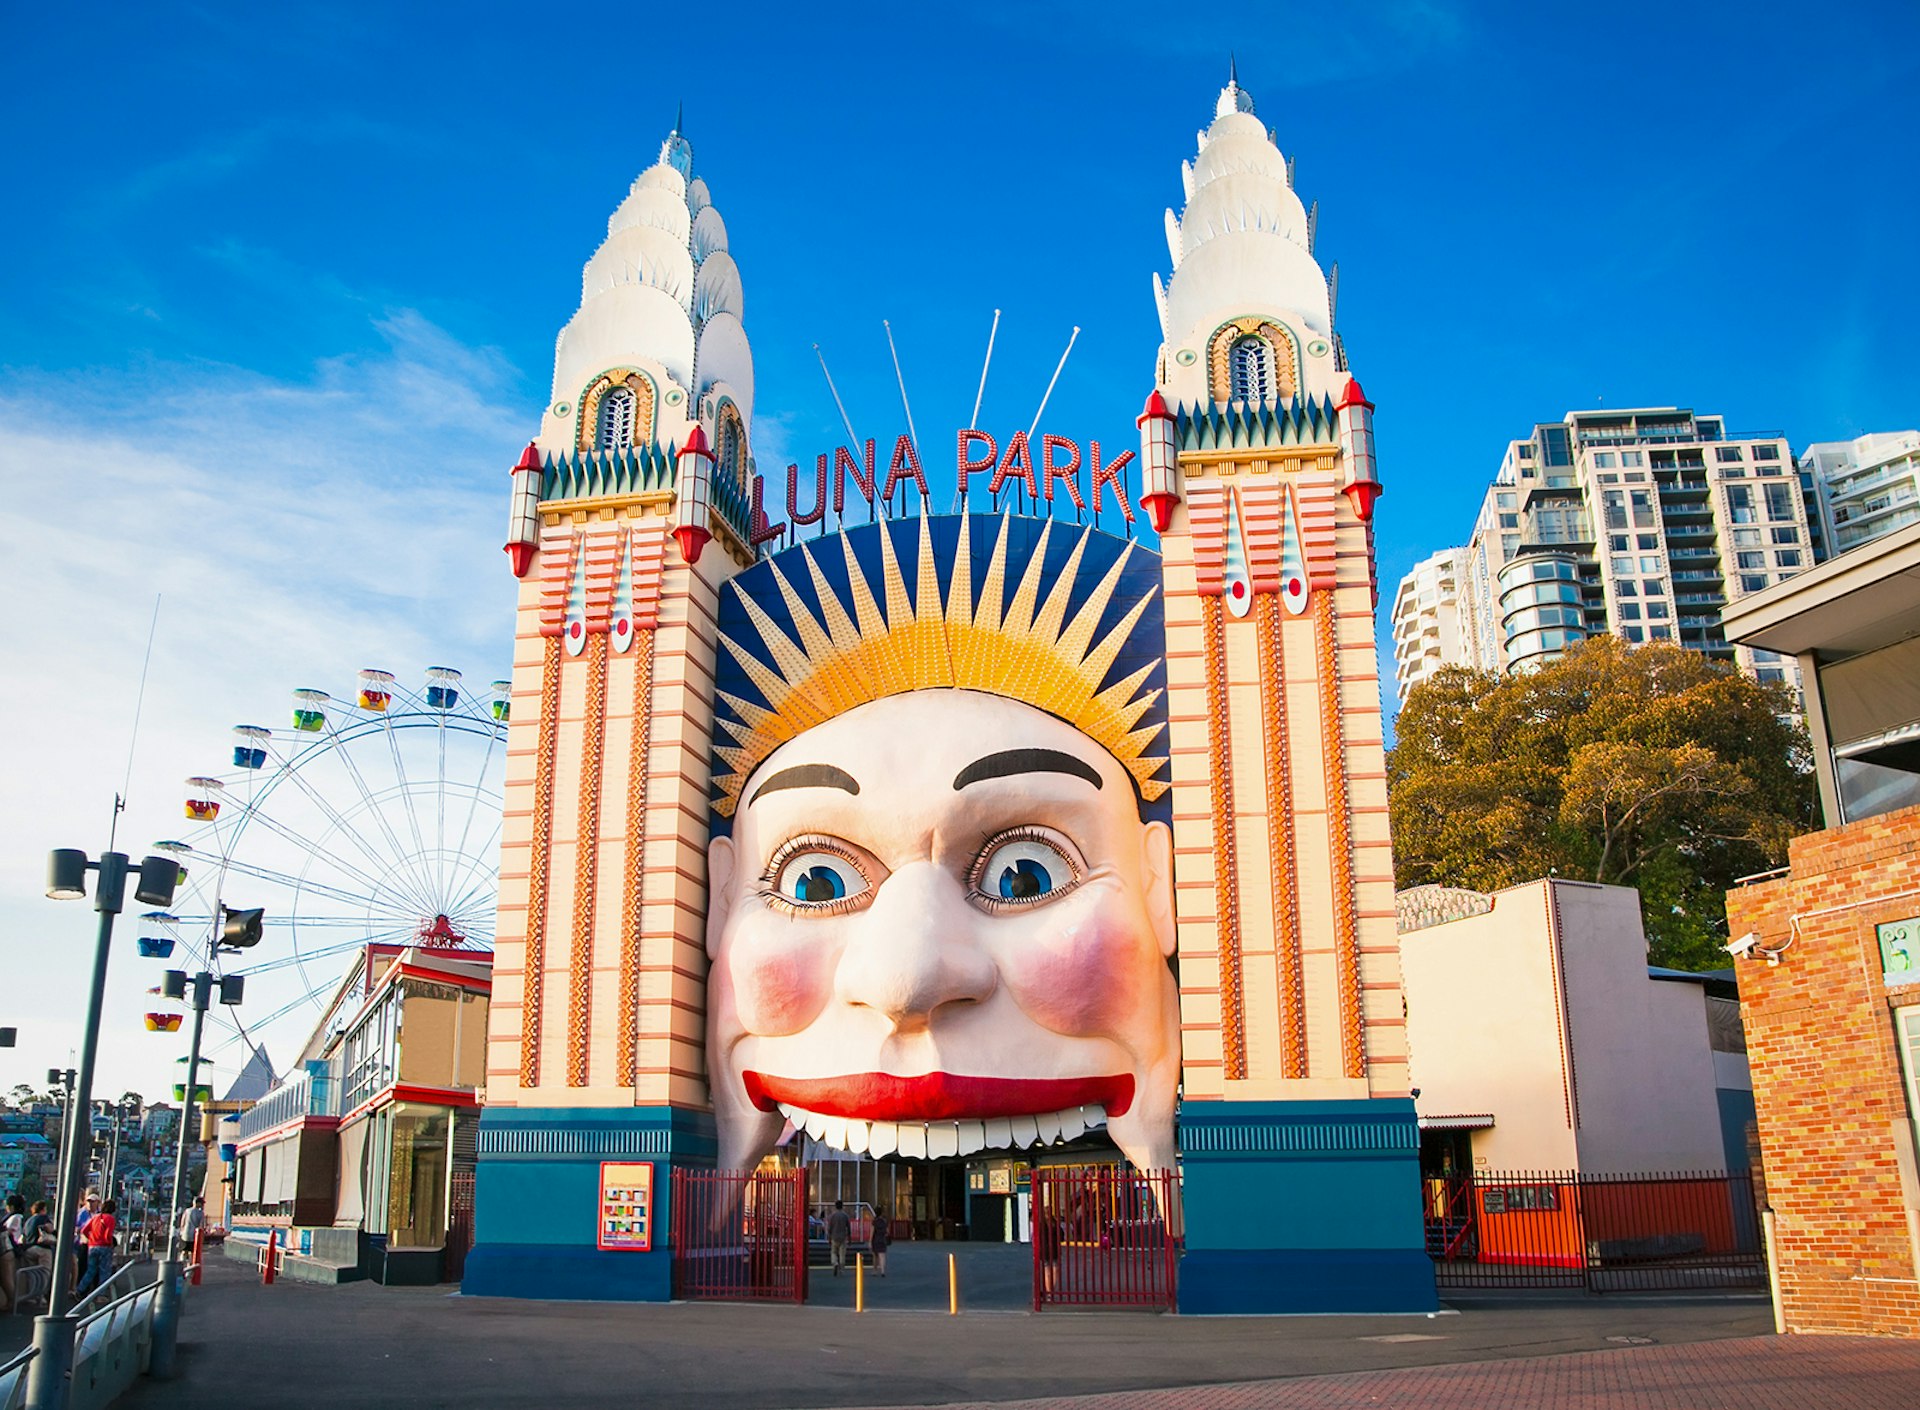 The Luna Park entrance has a large face smiling on the front, and people walk into its mouth to enter. Sydney, Australia